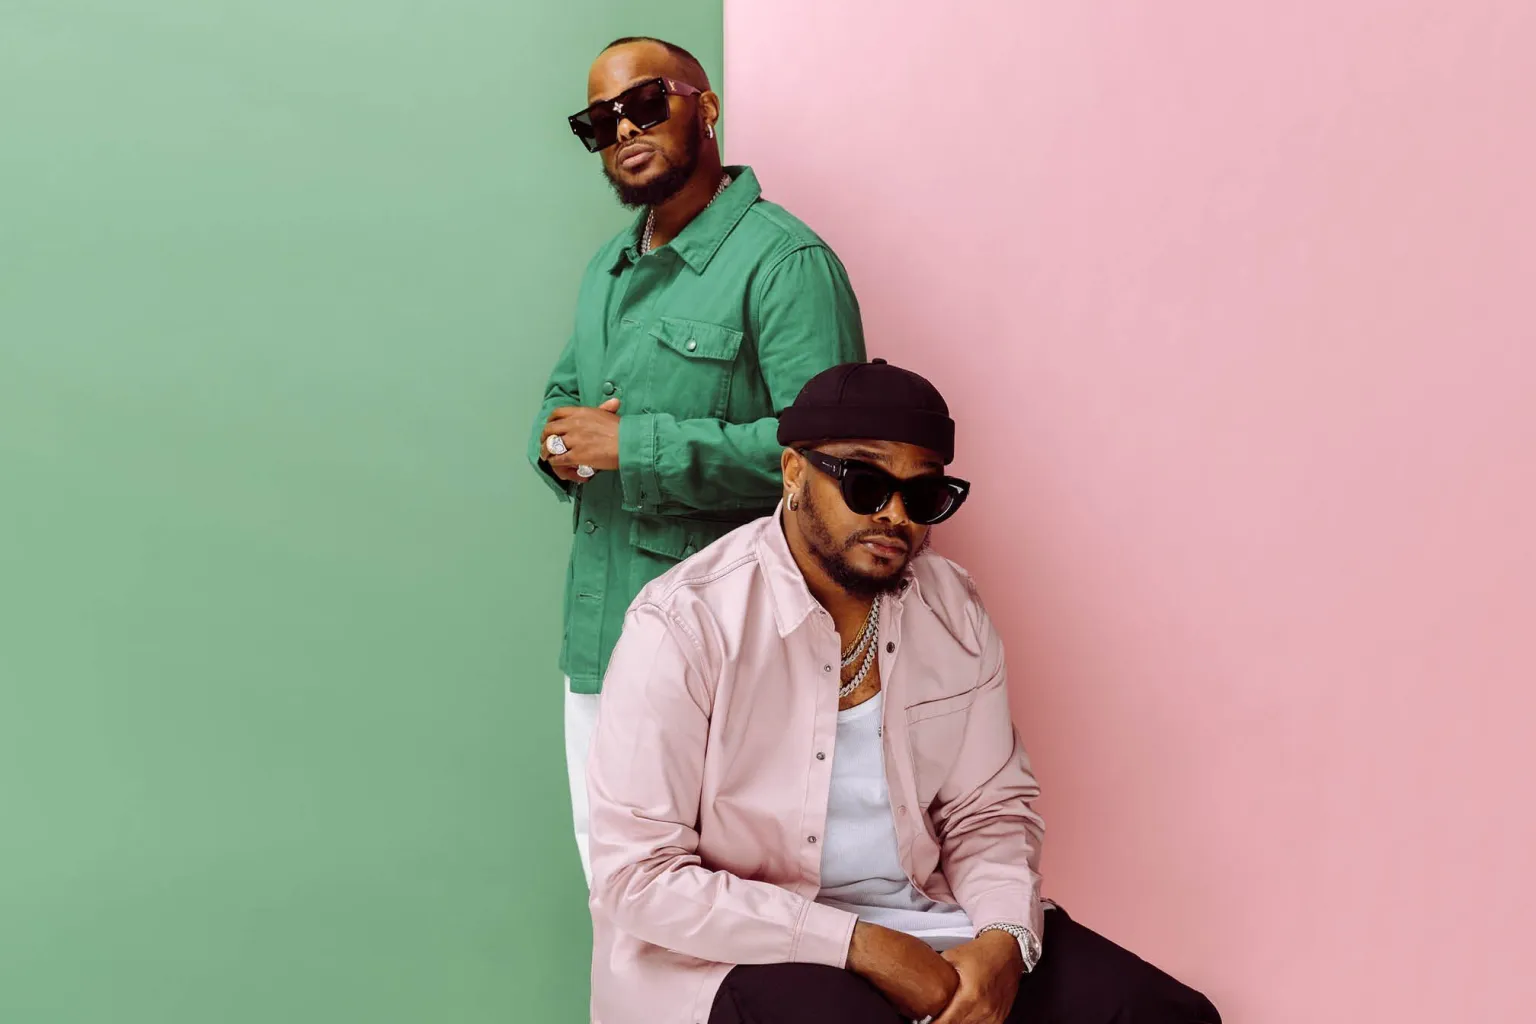 Musical Group Major League DJz Were With Riky Rick When He Took His Last Breath